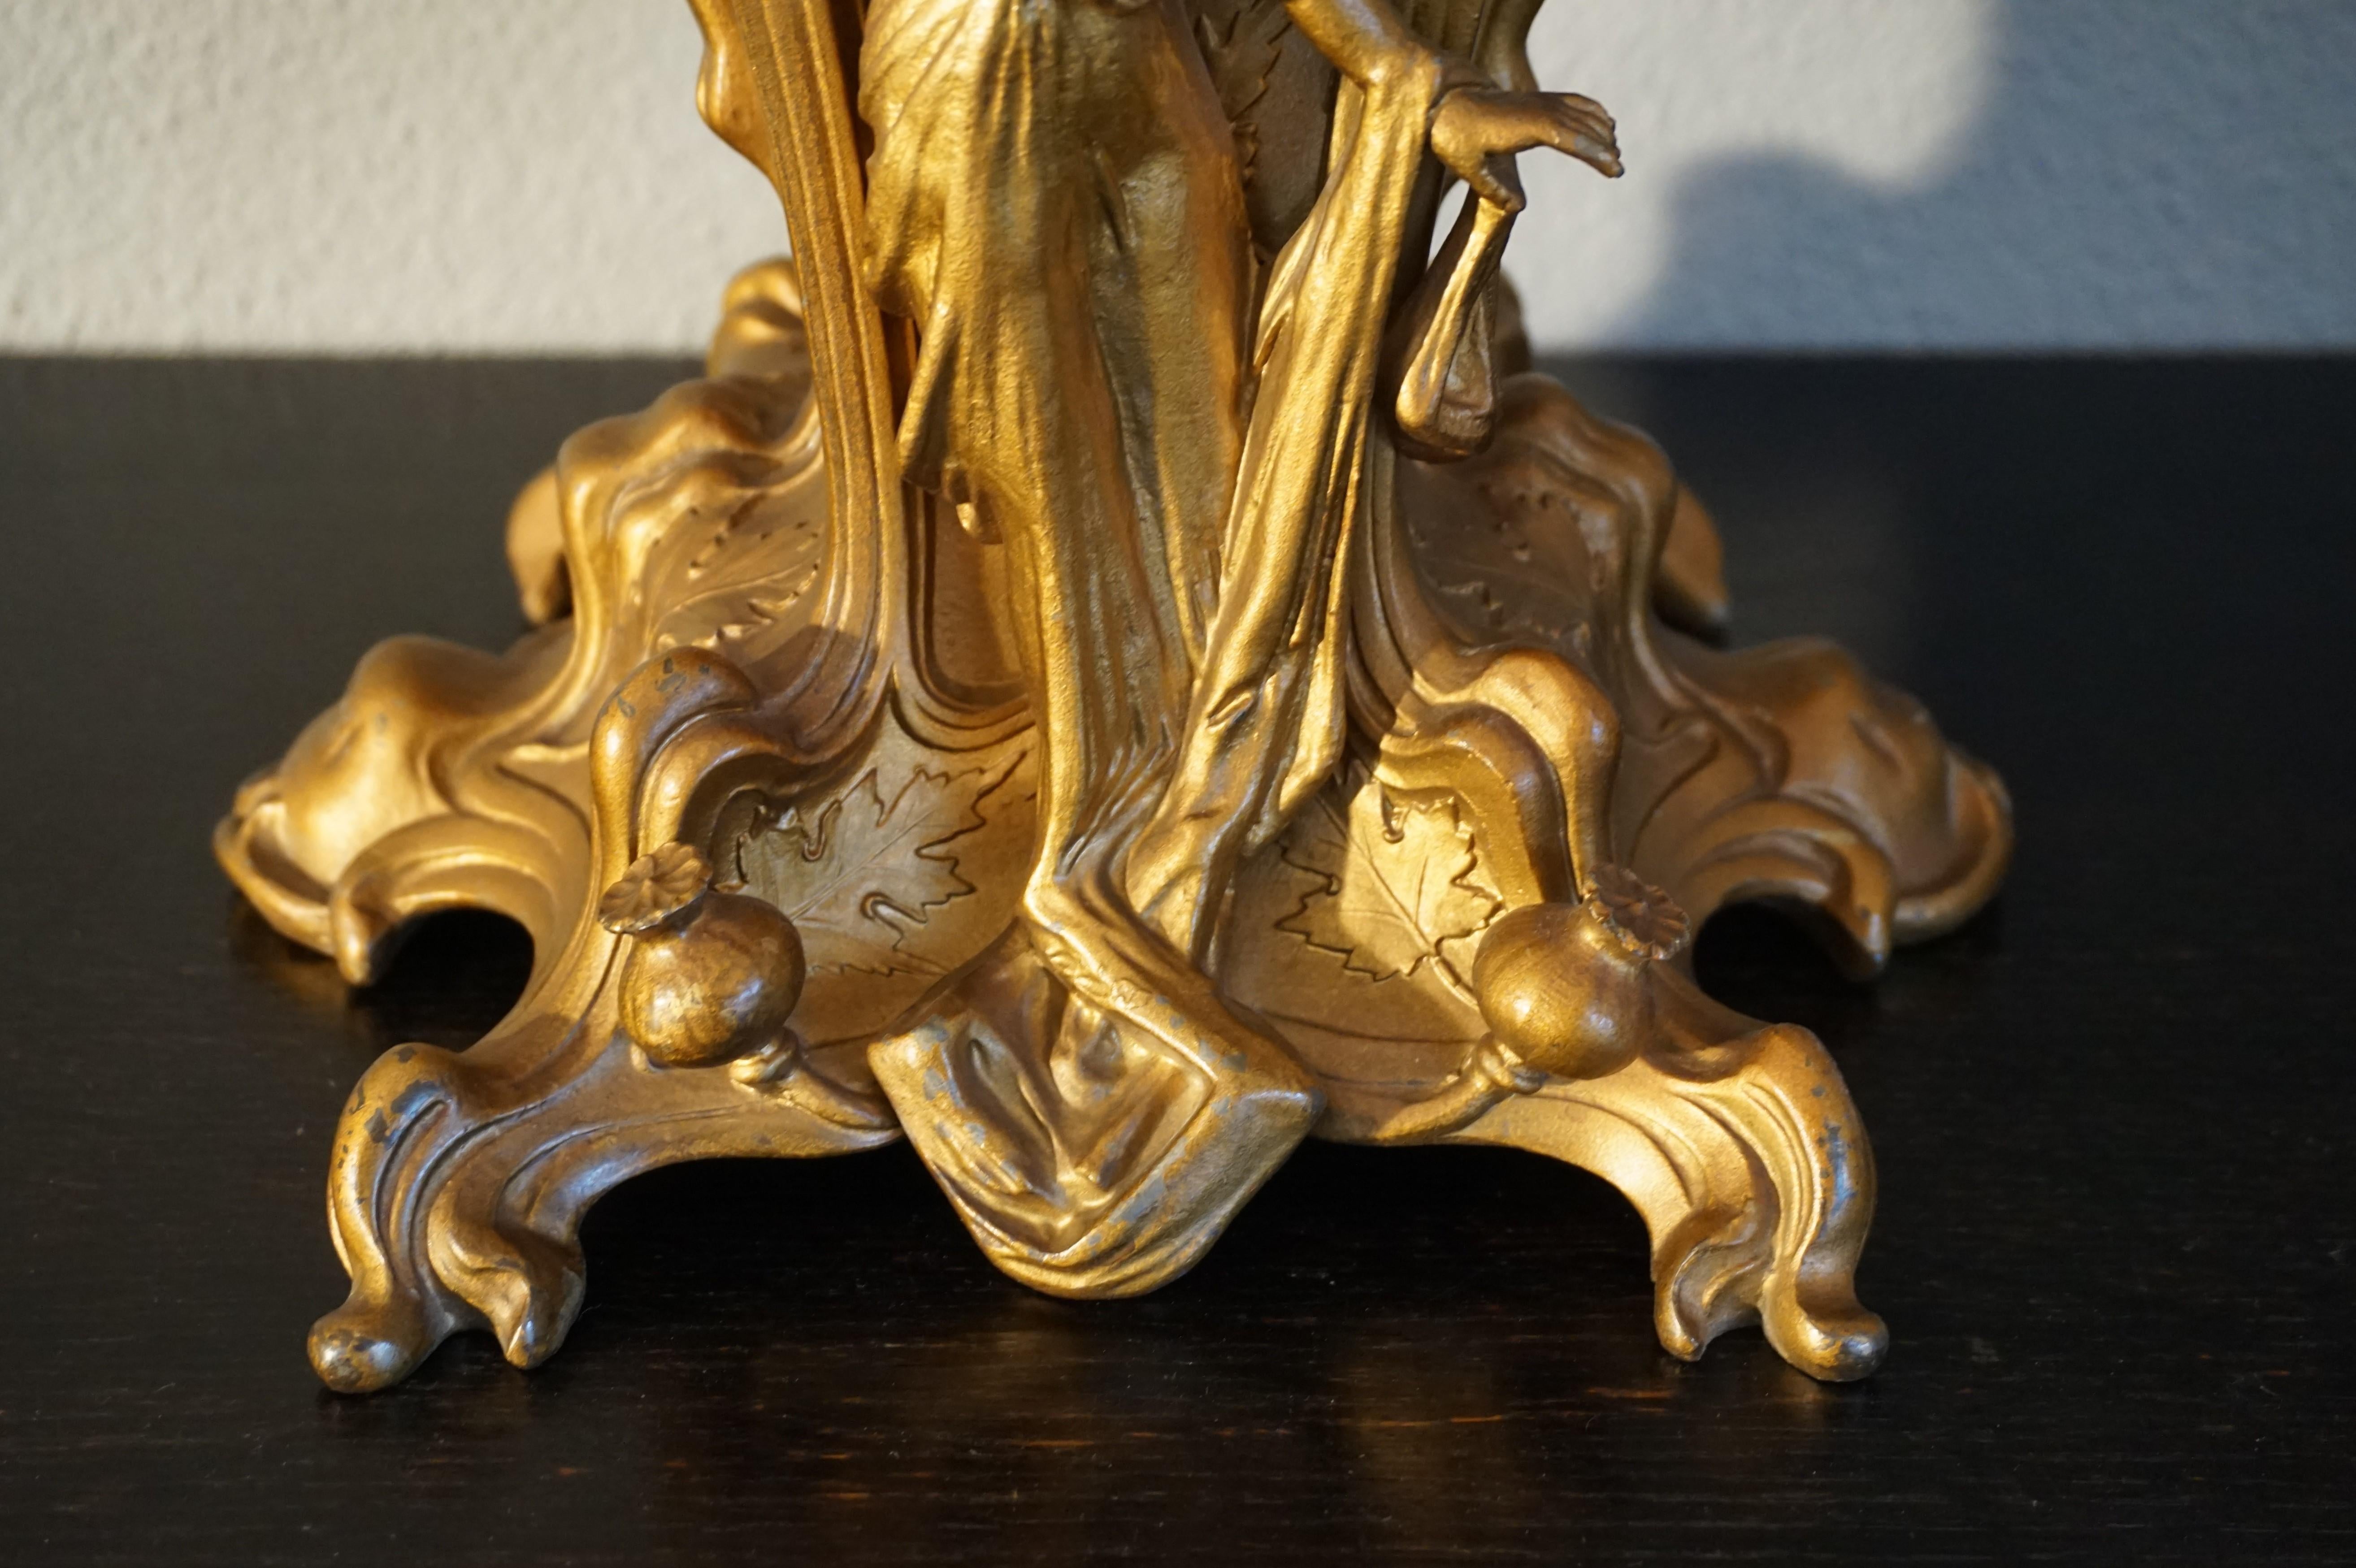 Stunning Early 20th Century Golden Color Art Nouveau Table or Mantel Clock 8